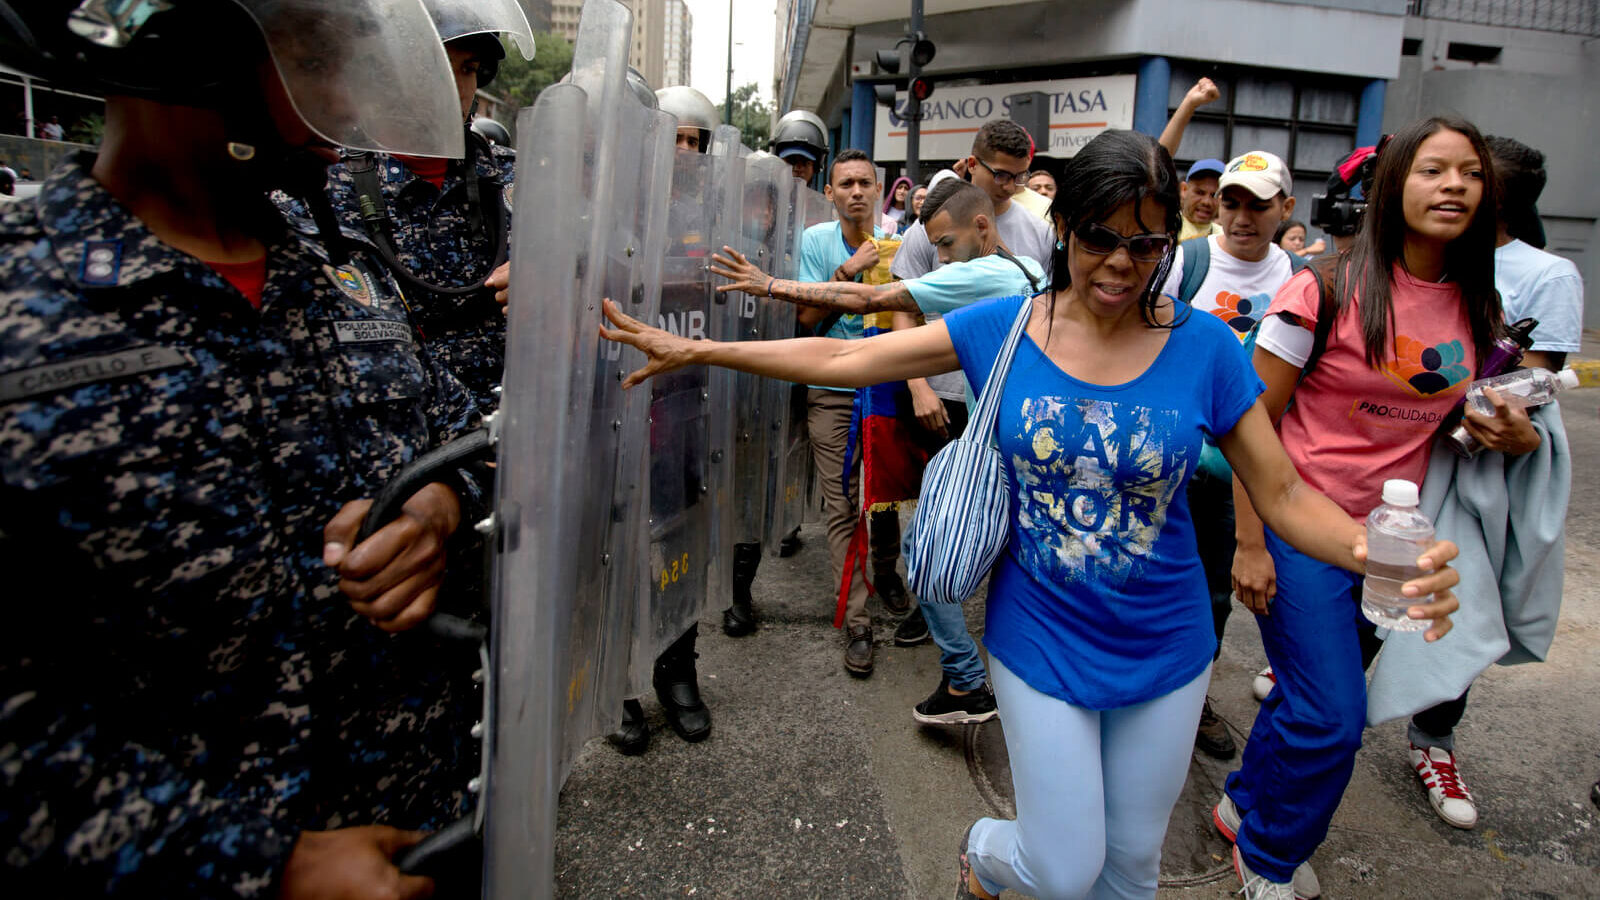 Demonstrators push police's shields as they protest Venezuela's President Nicolas Maduro near the attorney generals office in Caracas, Venezuela, July 18, 2018. The previous night, former presidential candidate and opposition leader Henrique Capriles called on the country's political forces to reorganize in order to cope with the South American country's hyperinflation, and lack of food and medicine. Fernando Llano | AP